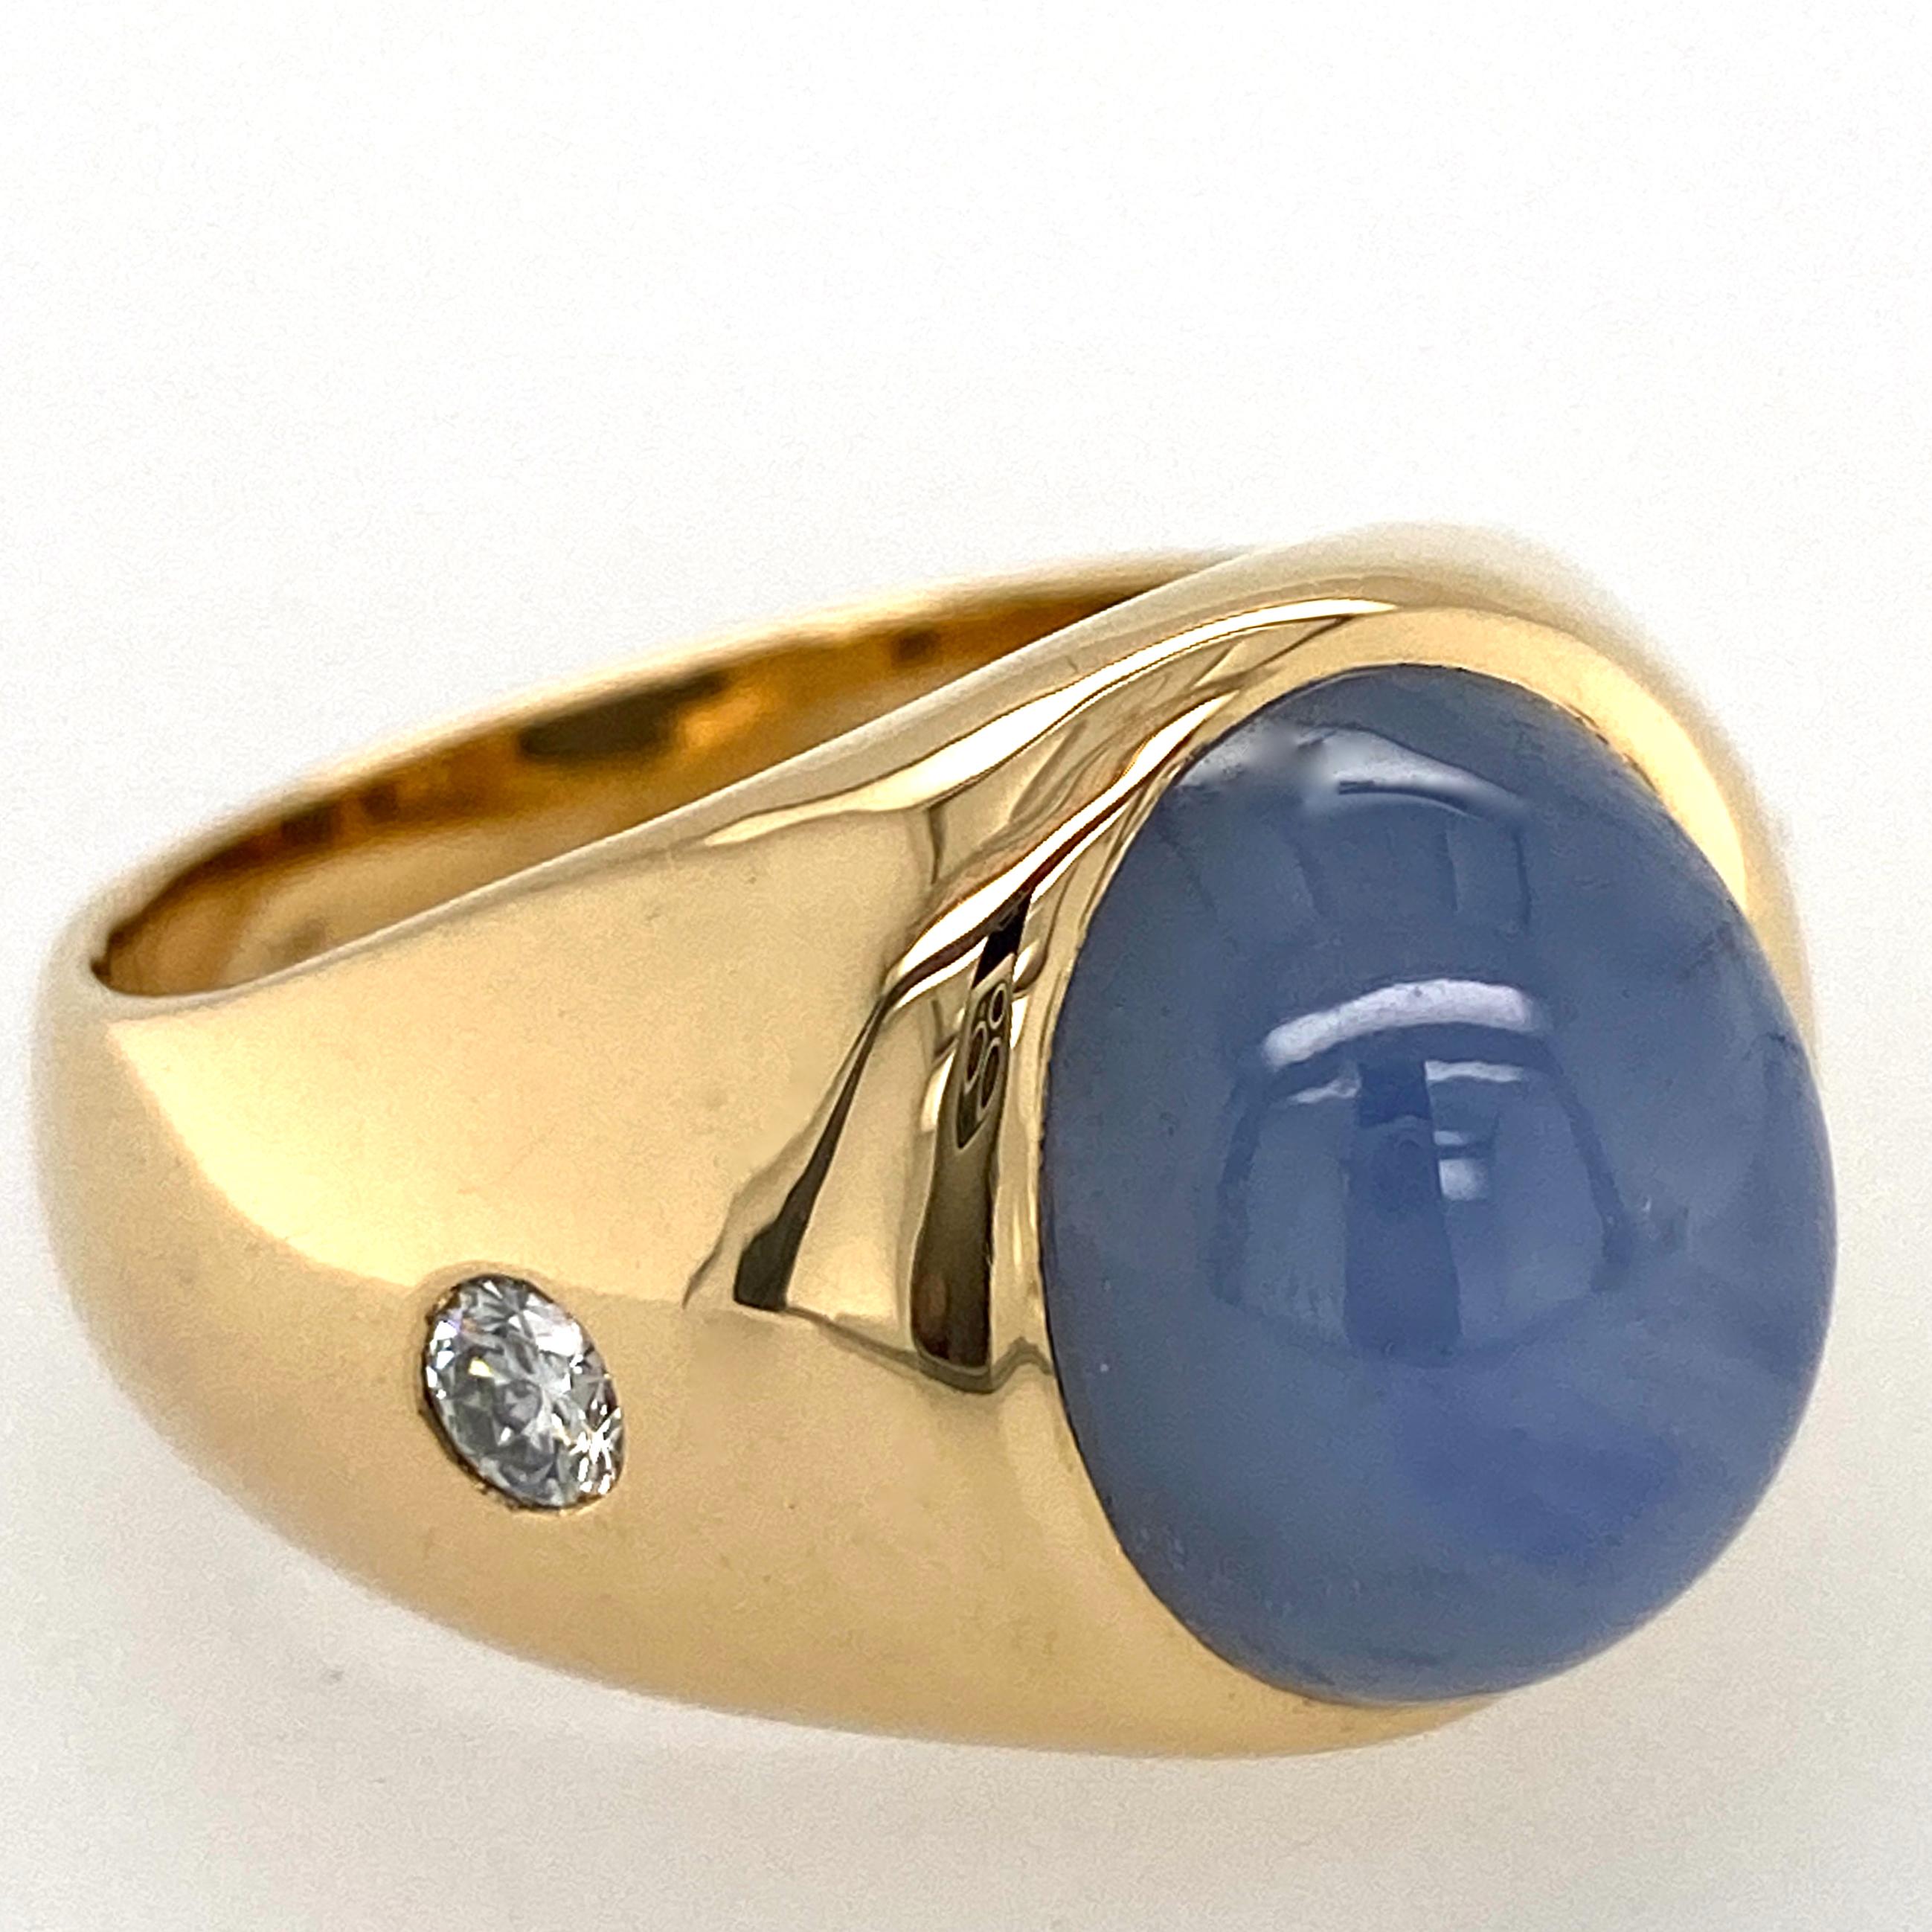 Cabochon Classic Gypsy Ring with 19 Carat Star Sapphire & Side Diamonds in 18 Karat Gold